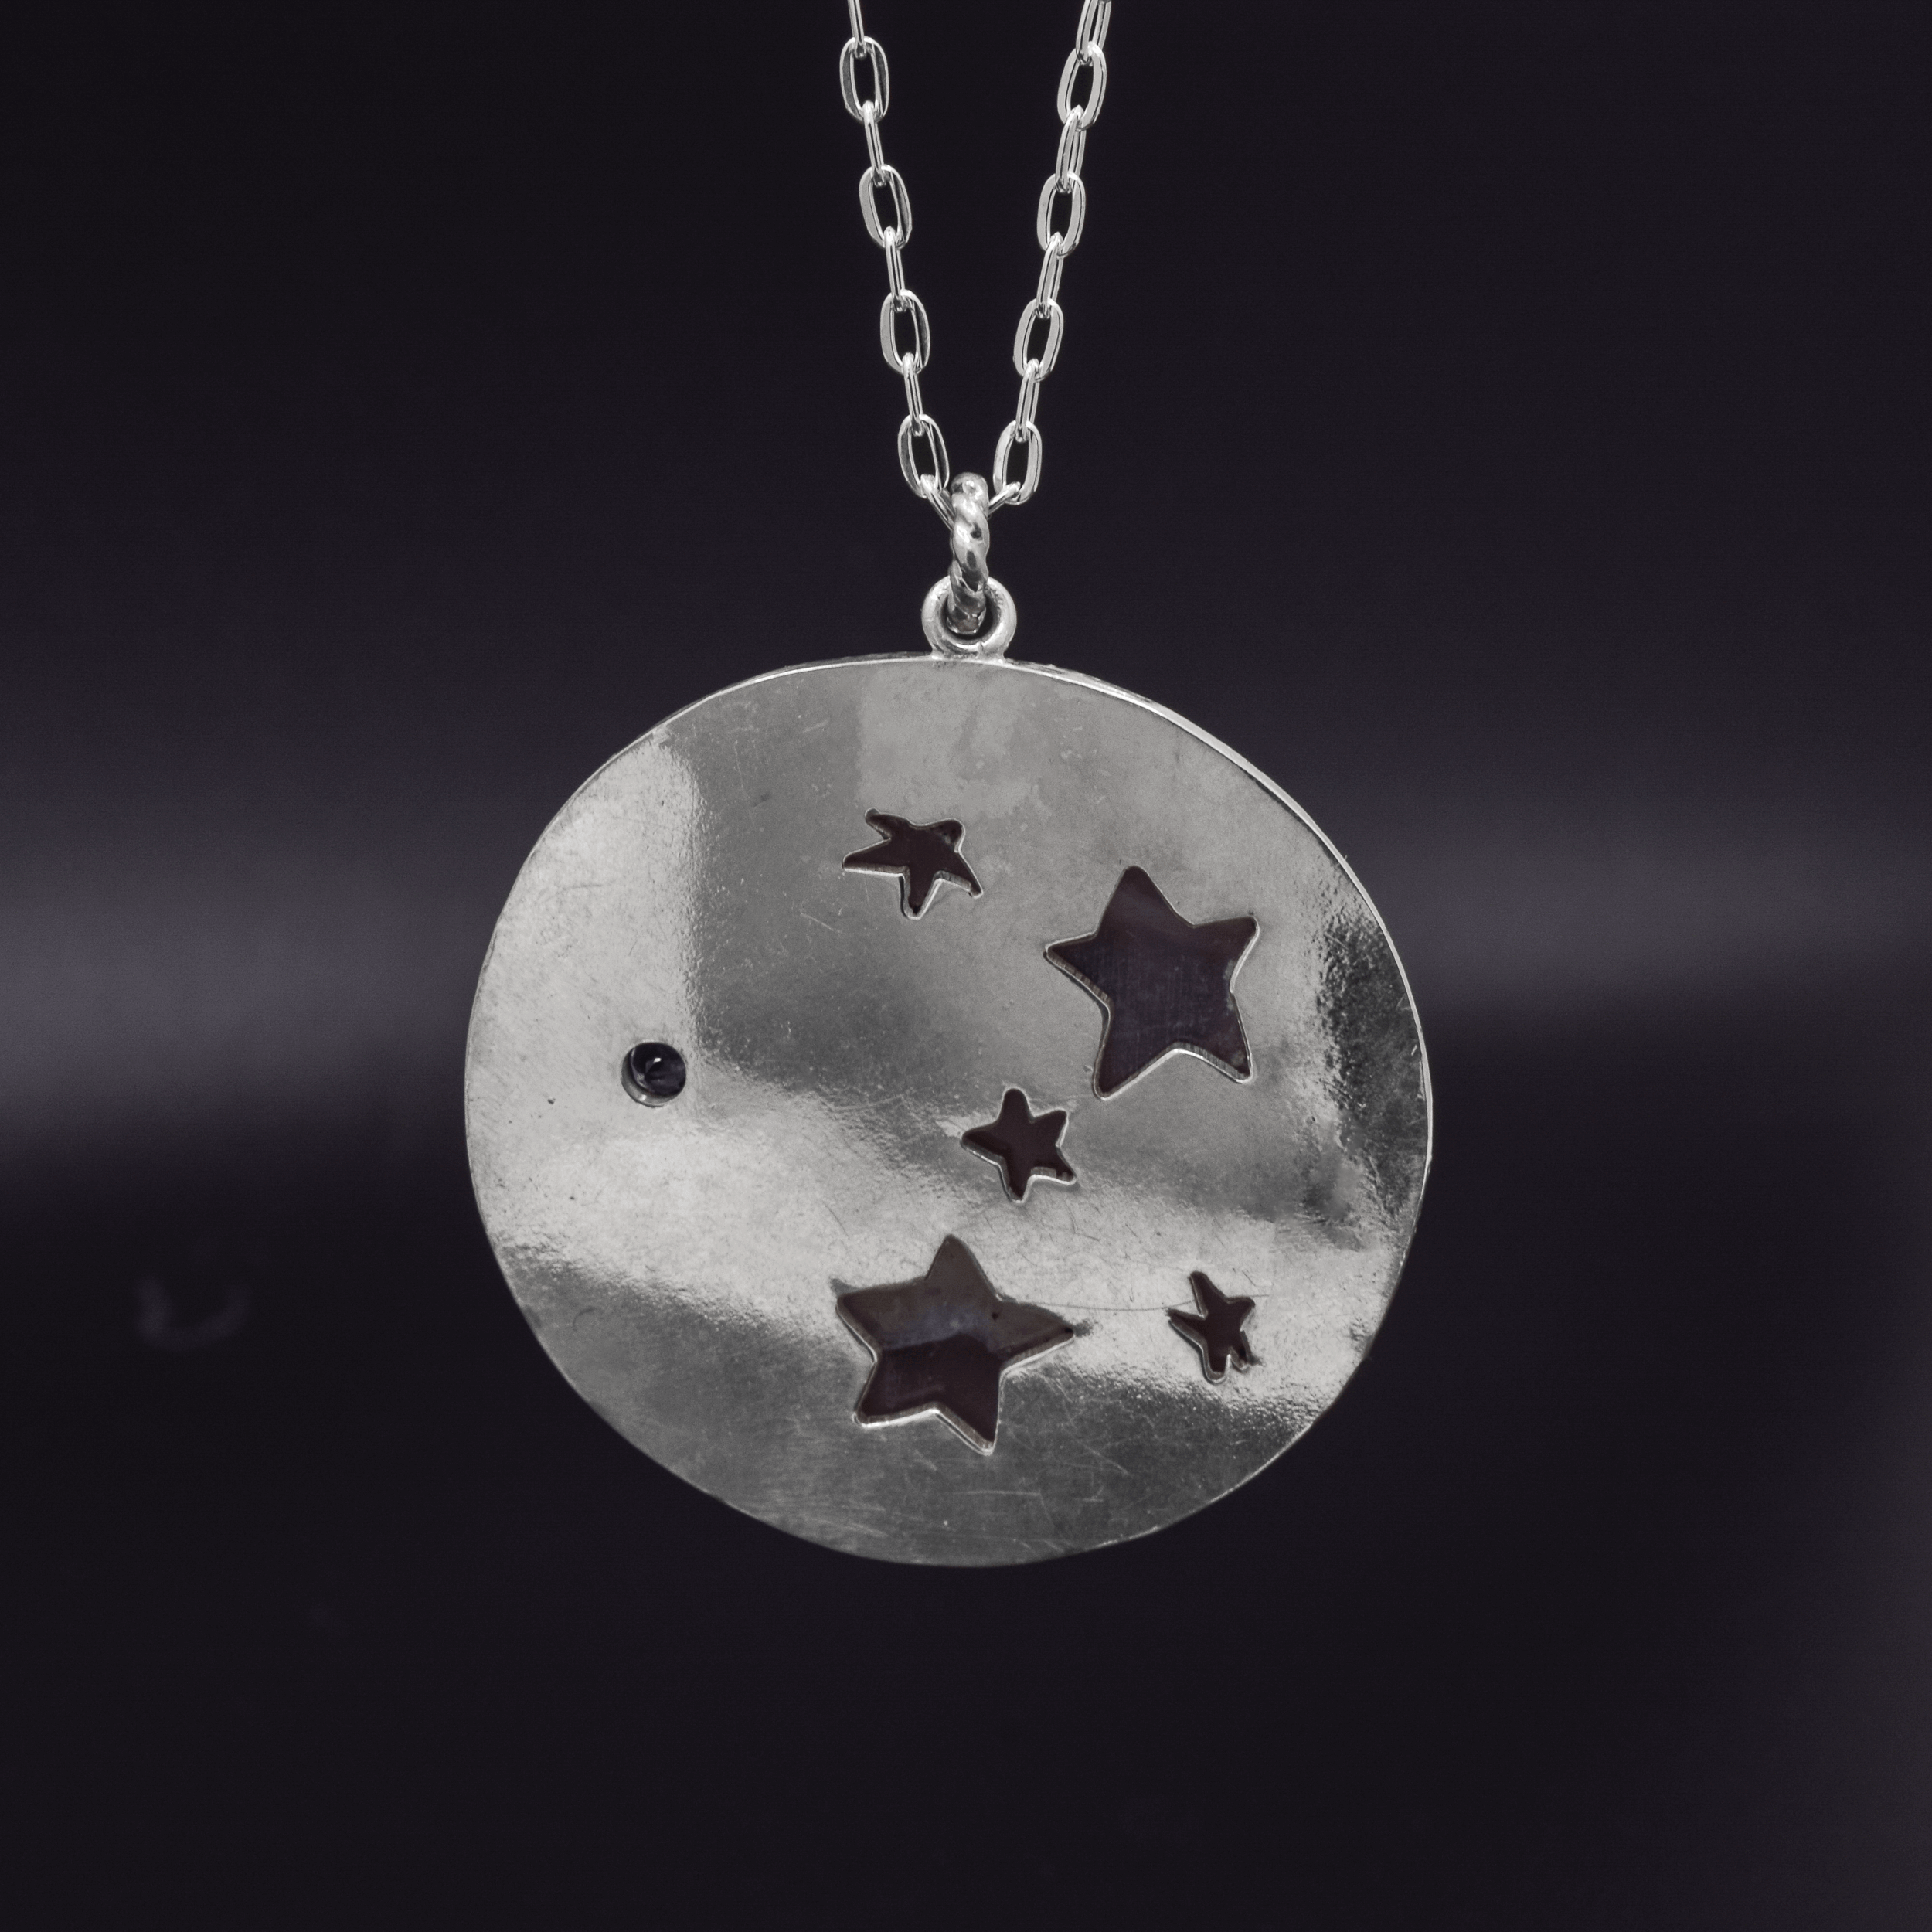 back of sterling silver circle pendant with pierced stars hanging on a cable chain